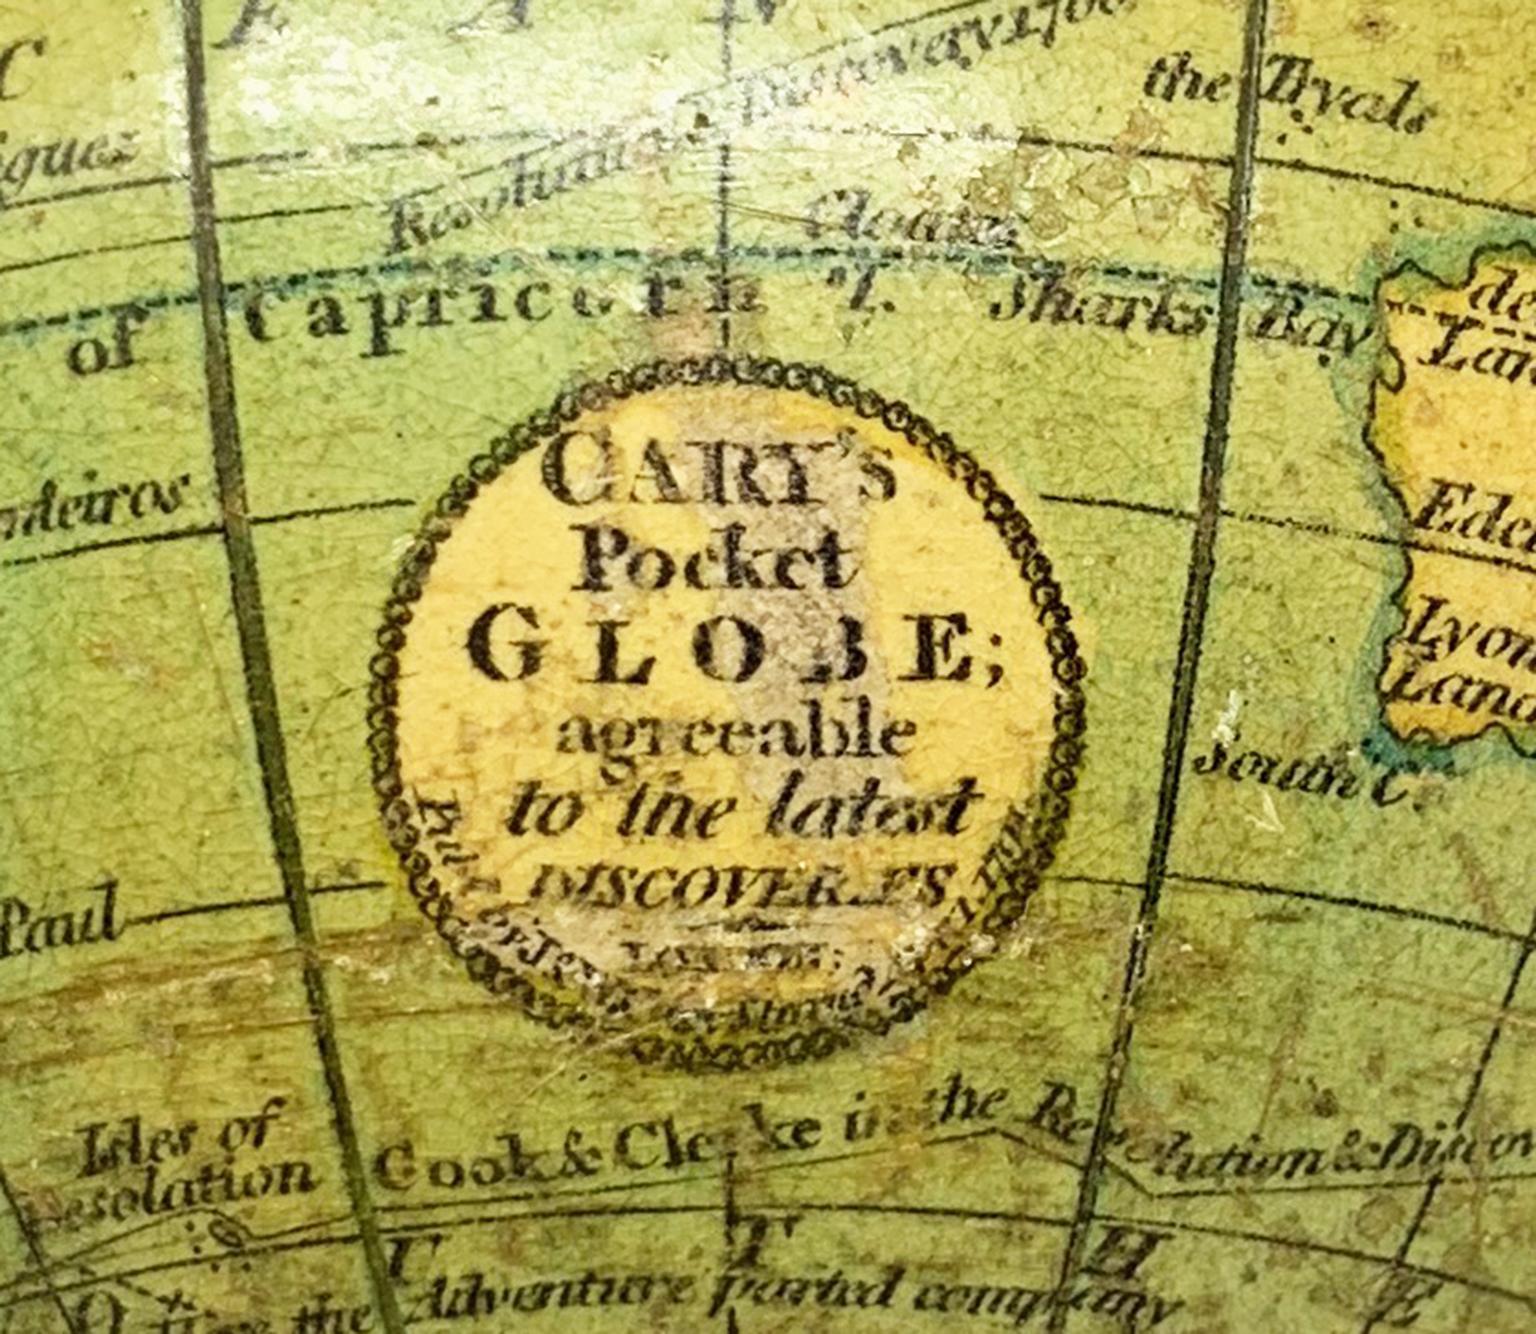 John and William Cary
Pocket globe
London, 1791

The pocket globe is contained in its original case, which itself is covered in shark skin.
Few and slight gaps in the original paint on the sphere. The case no longer closes.
It measures 3 in